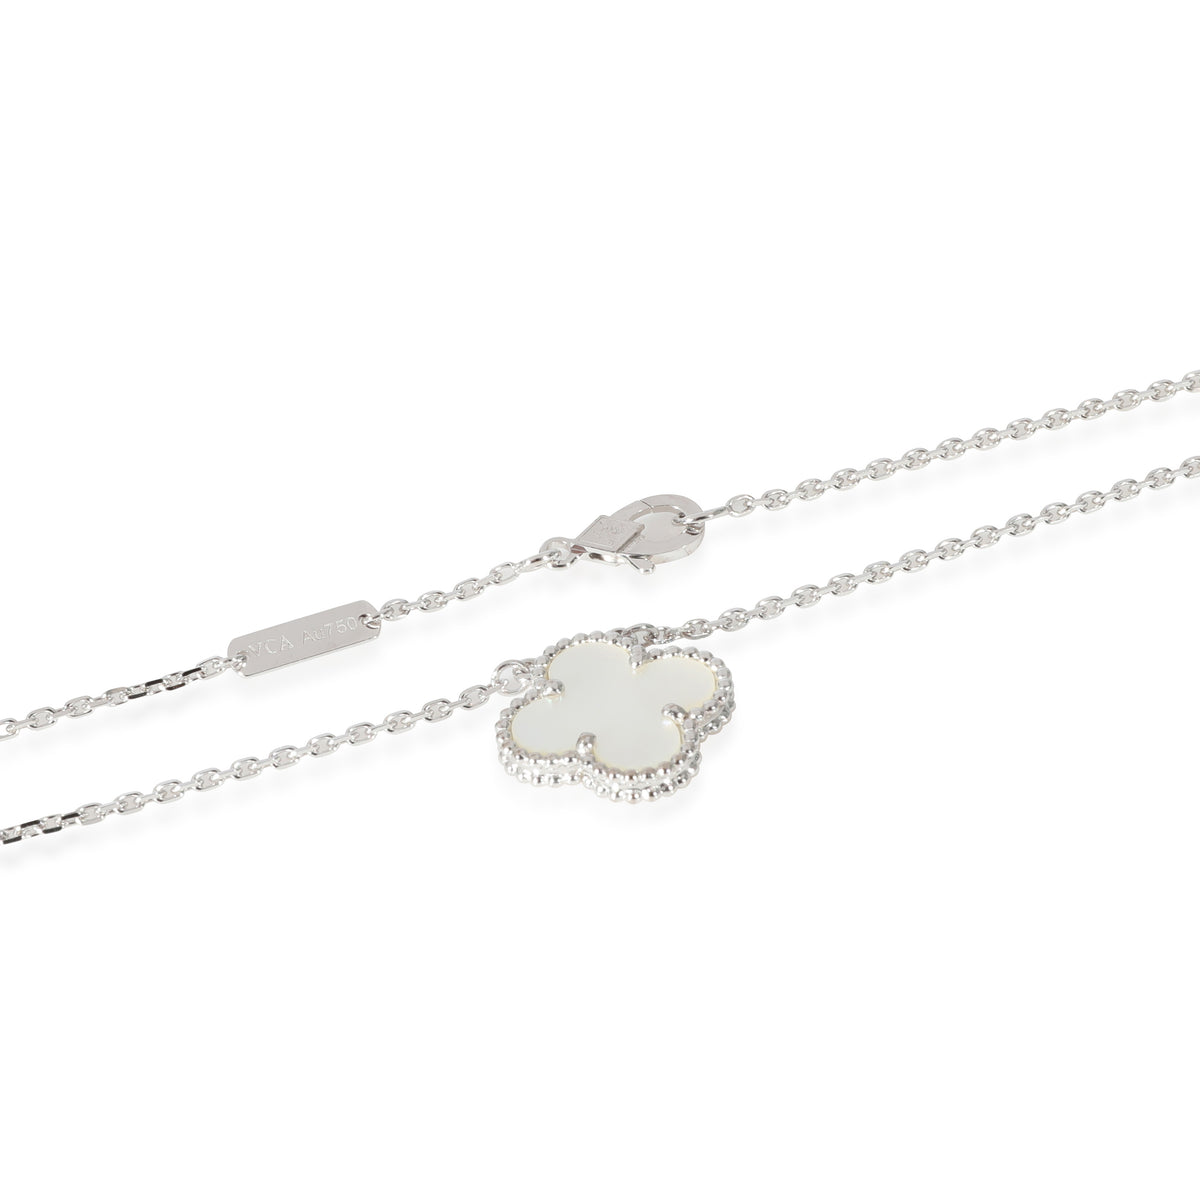 Van Cleef & Arpels Alhambra Mother Of Pearl Necklace in 18k White Gold